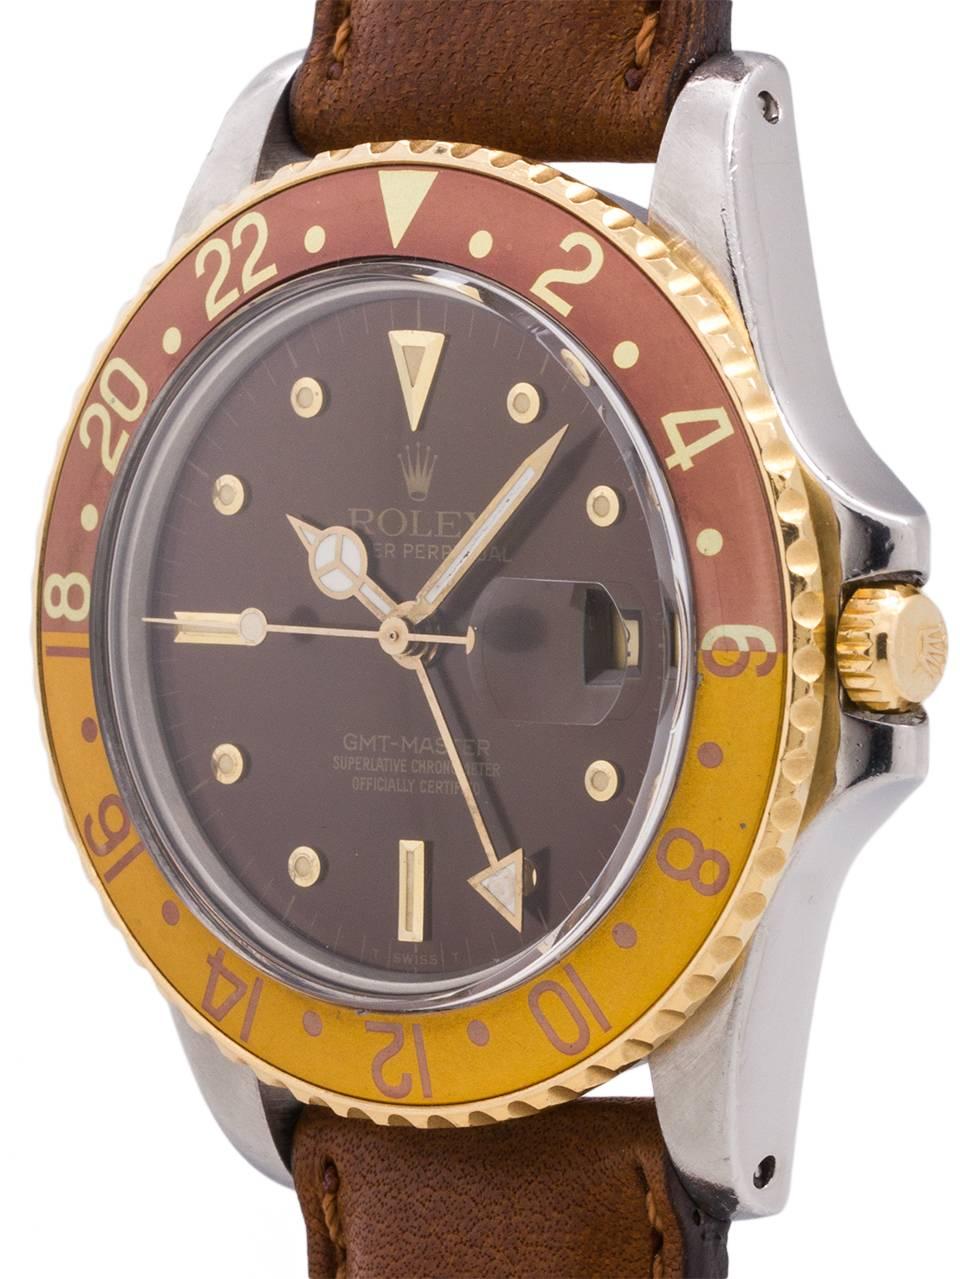 
Great looking and popular vintage Rolex ref# 16753 GMT stainless steel and 18K YG circa 1980. Fondly nicknamed the “Rootbeer GMT”. Featuring a 40mm diameter case with bi-directional 24 hour, two toned bezel in brown and gold, in stunning condition